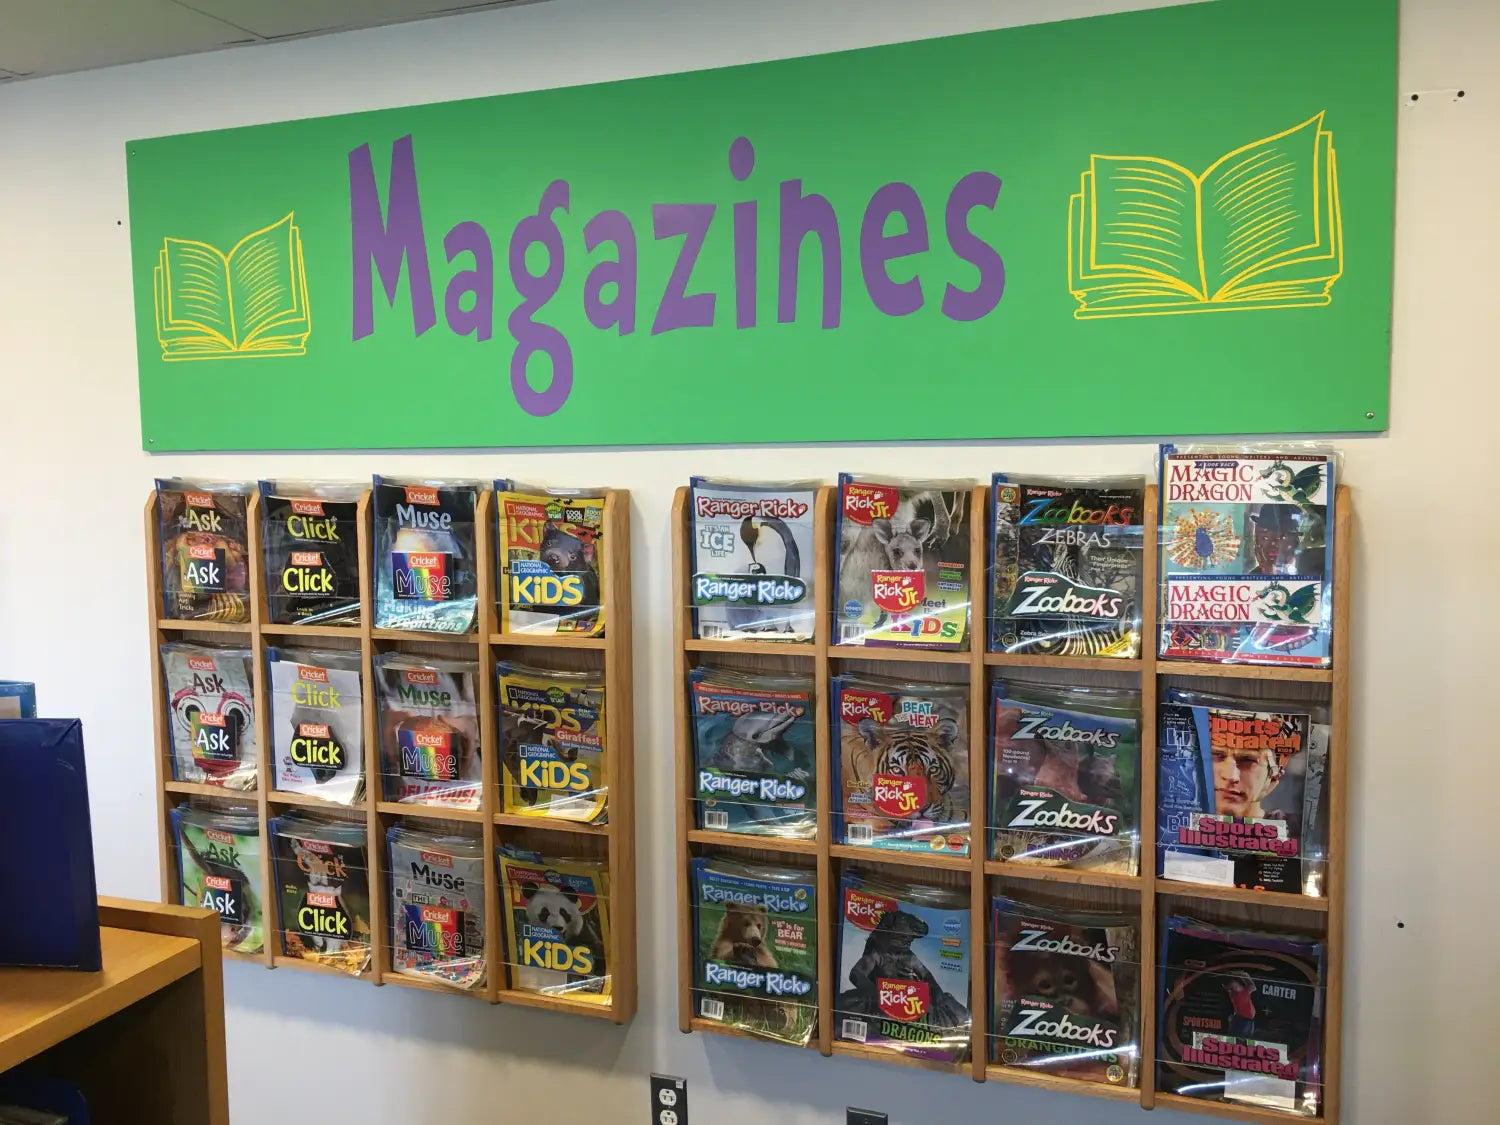 Magazine Rack in School Library - Great Display Idea by Librarian at JFK School Library using Simple Stencil Custom Wall Decals